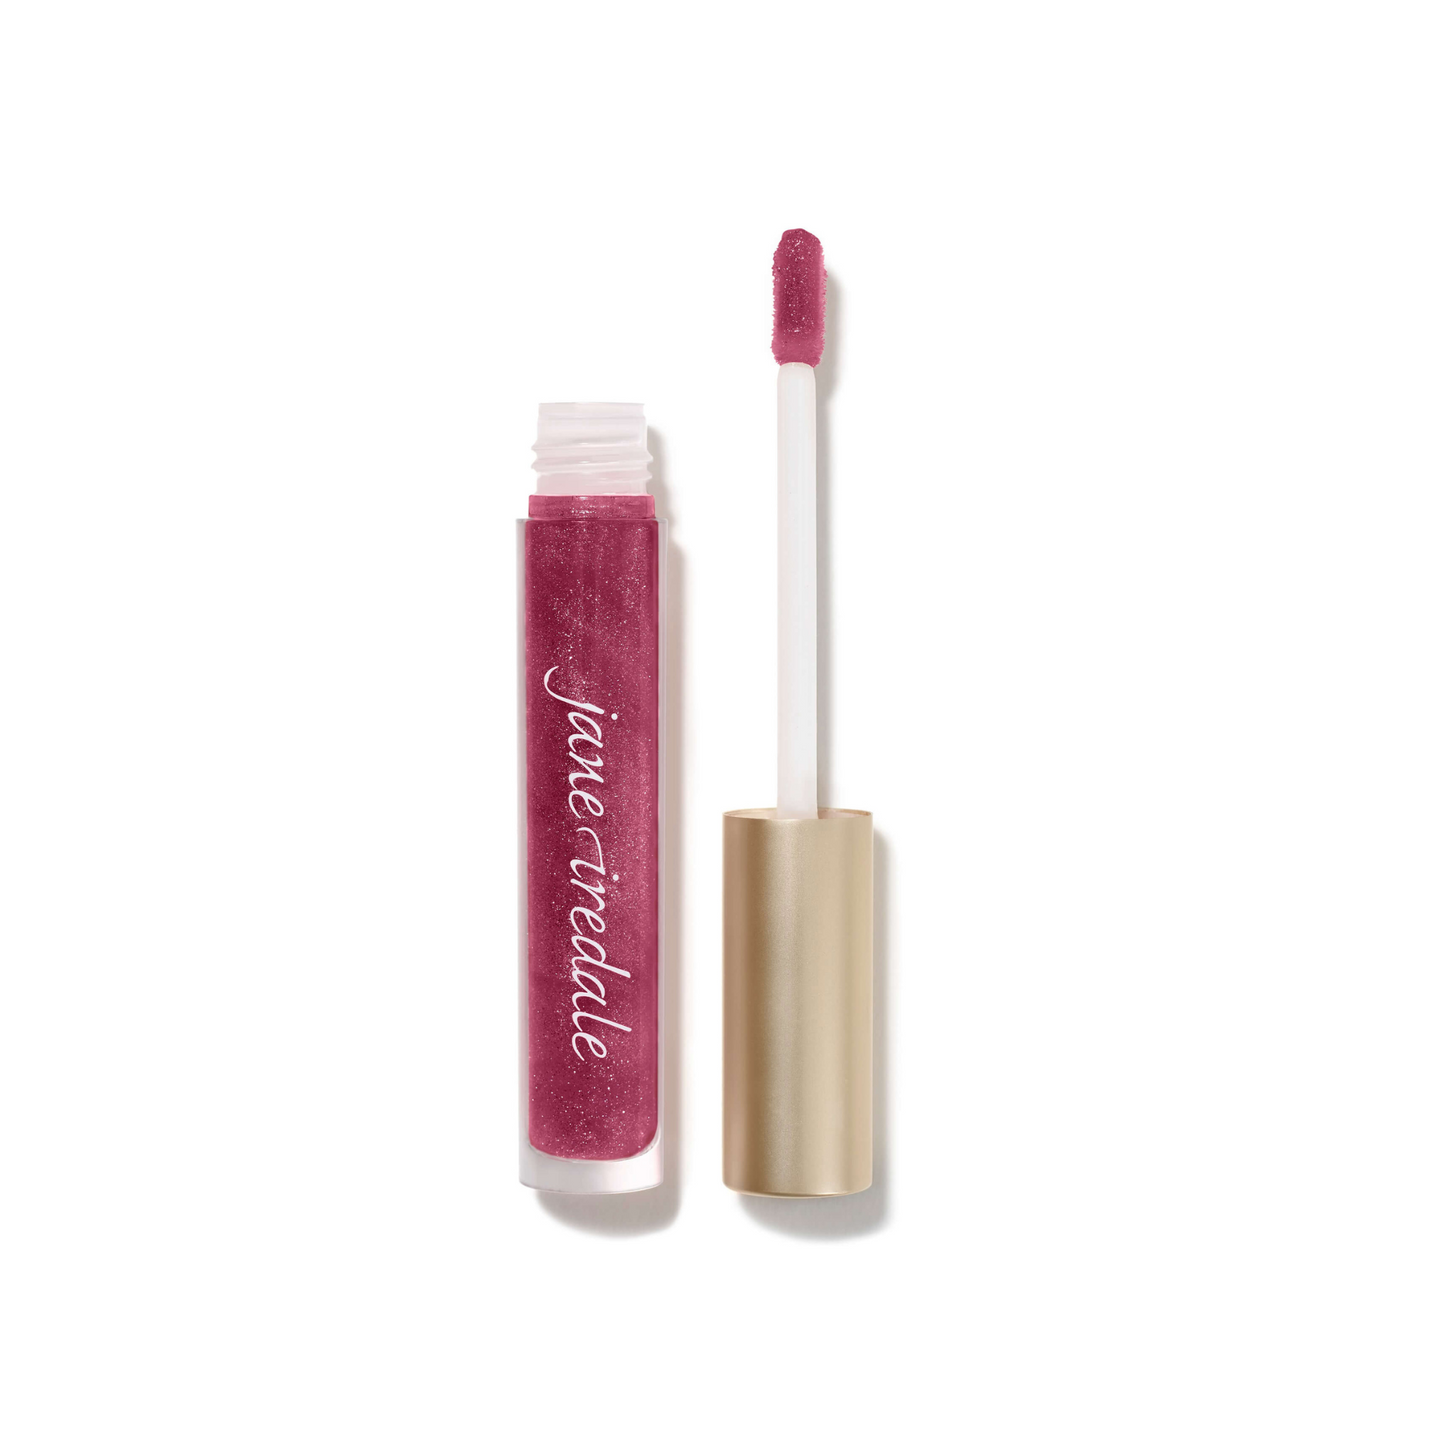 Jane Iredale HydroPure Hyaluronic Acid Lip Gloss - Candied Rose